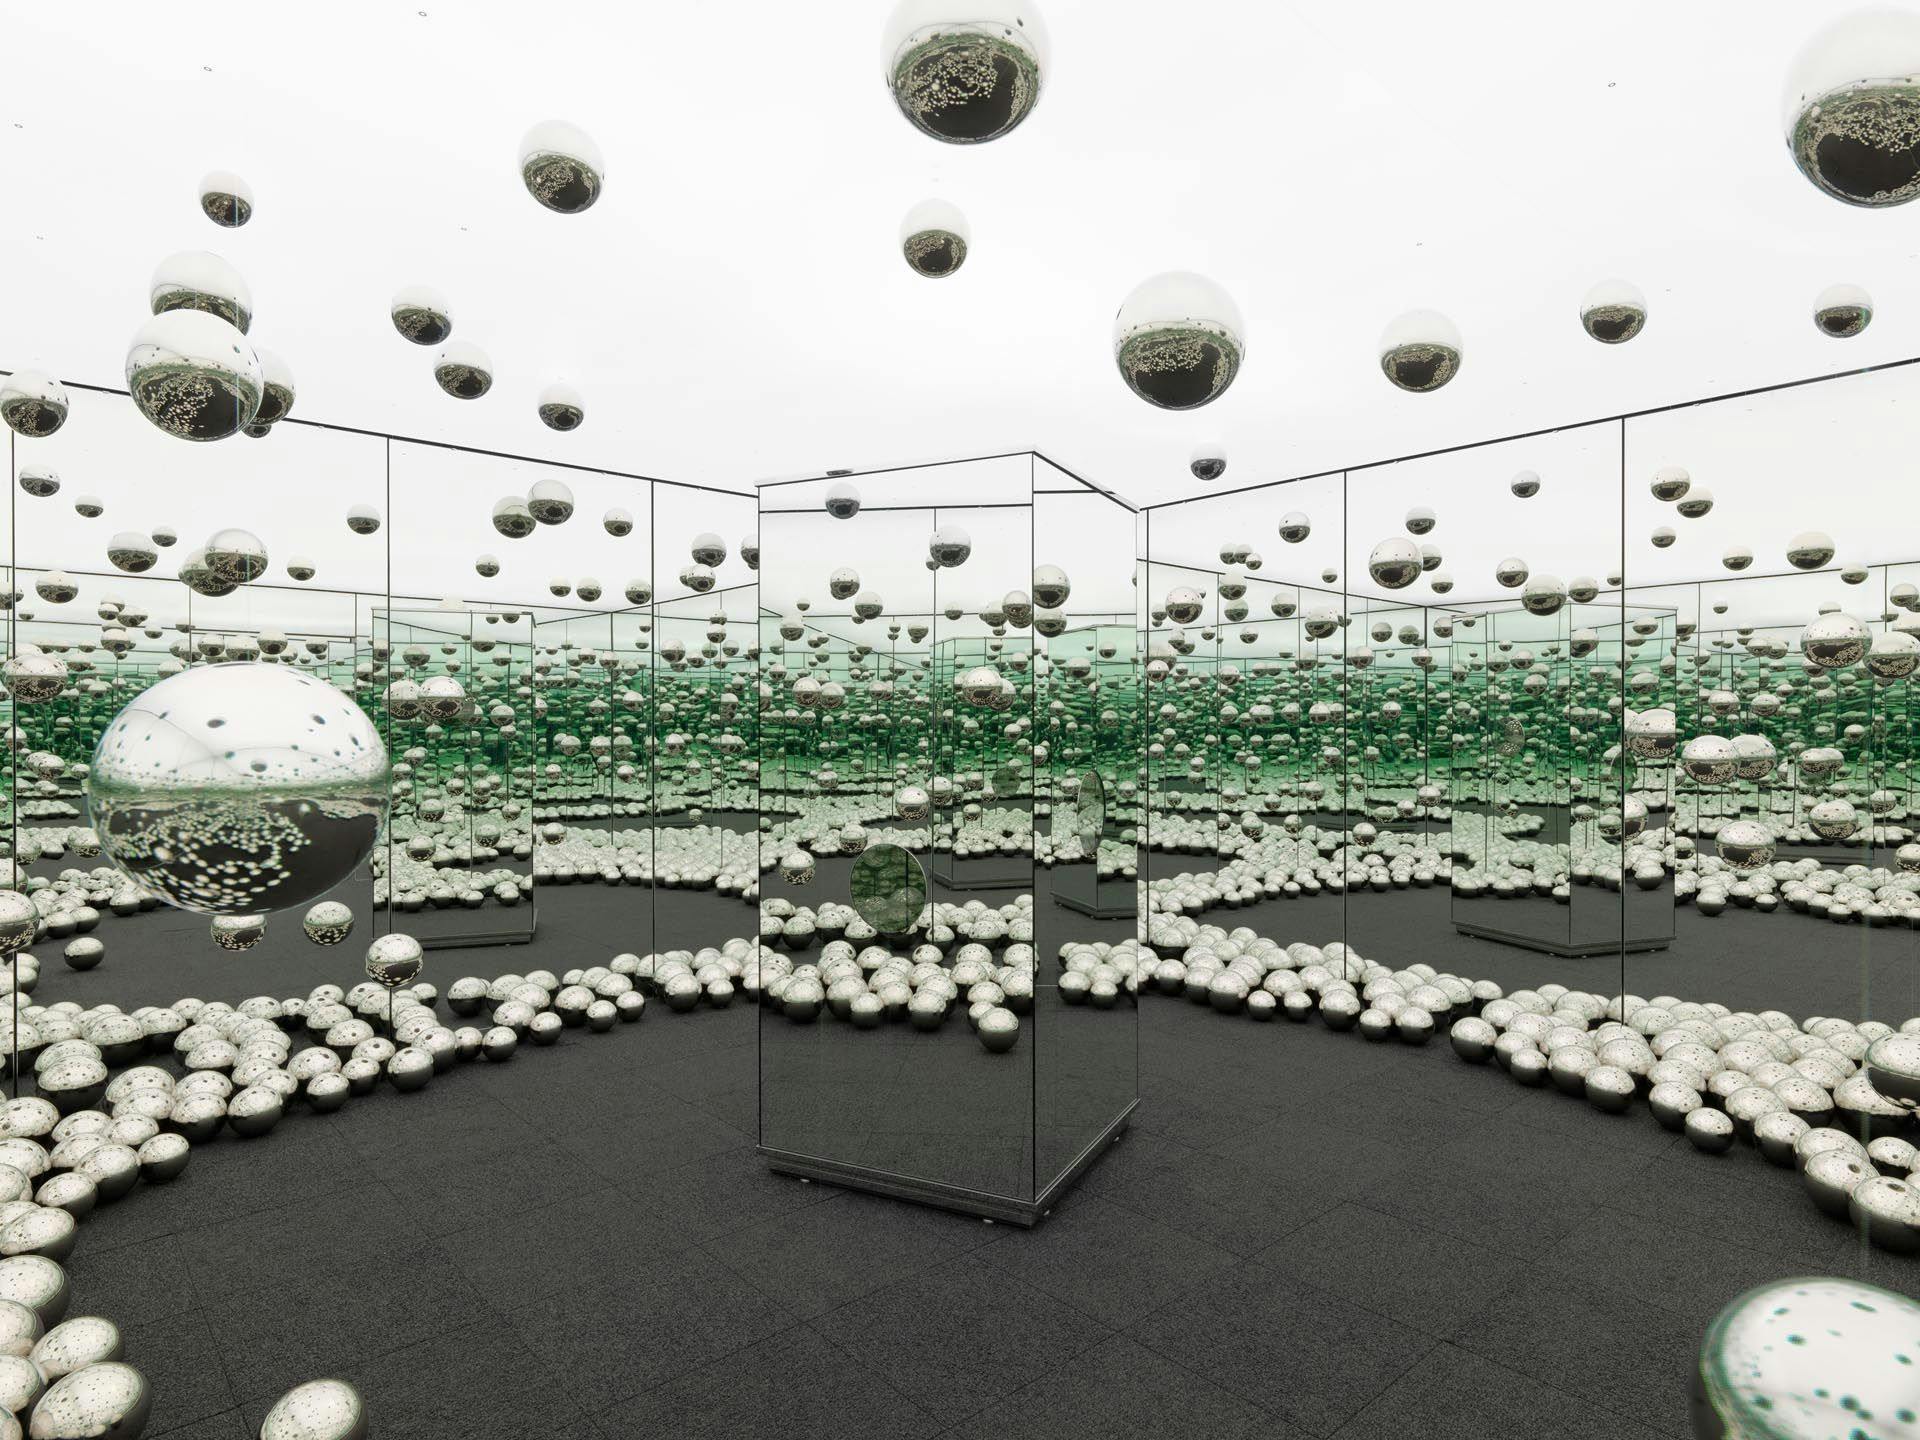 An experiential installation by Yayoi Kusama, comprised of mirrors, wood, LED lighting system, metal, steel balls, and carpeting, titled Infinity Mirrored Room - Let's Survive Forever, dated 2017.